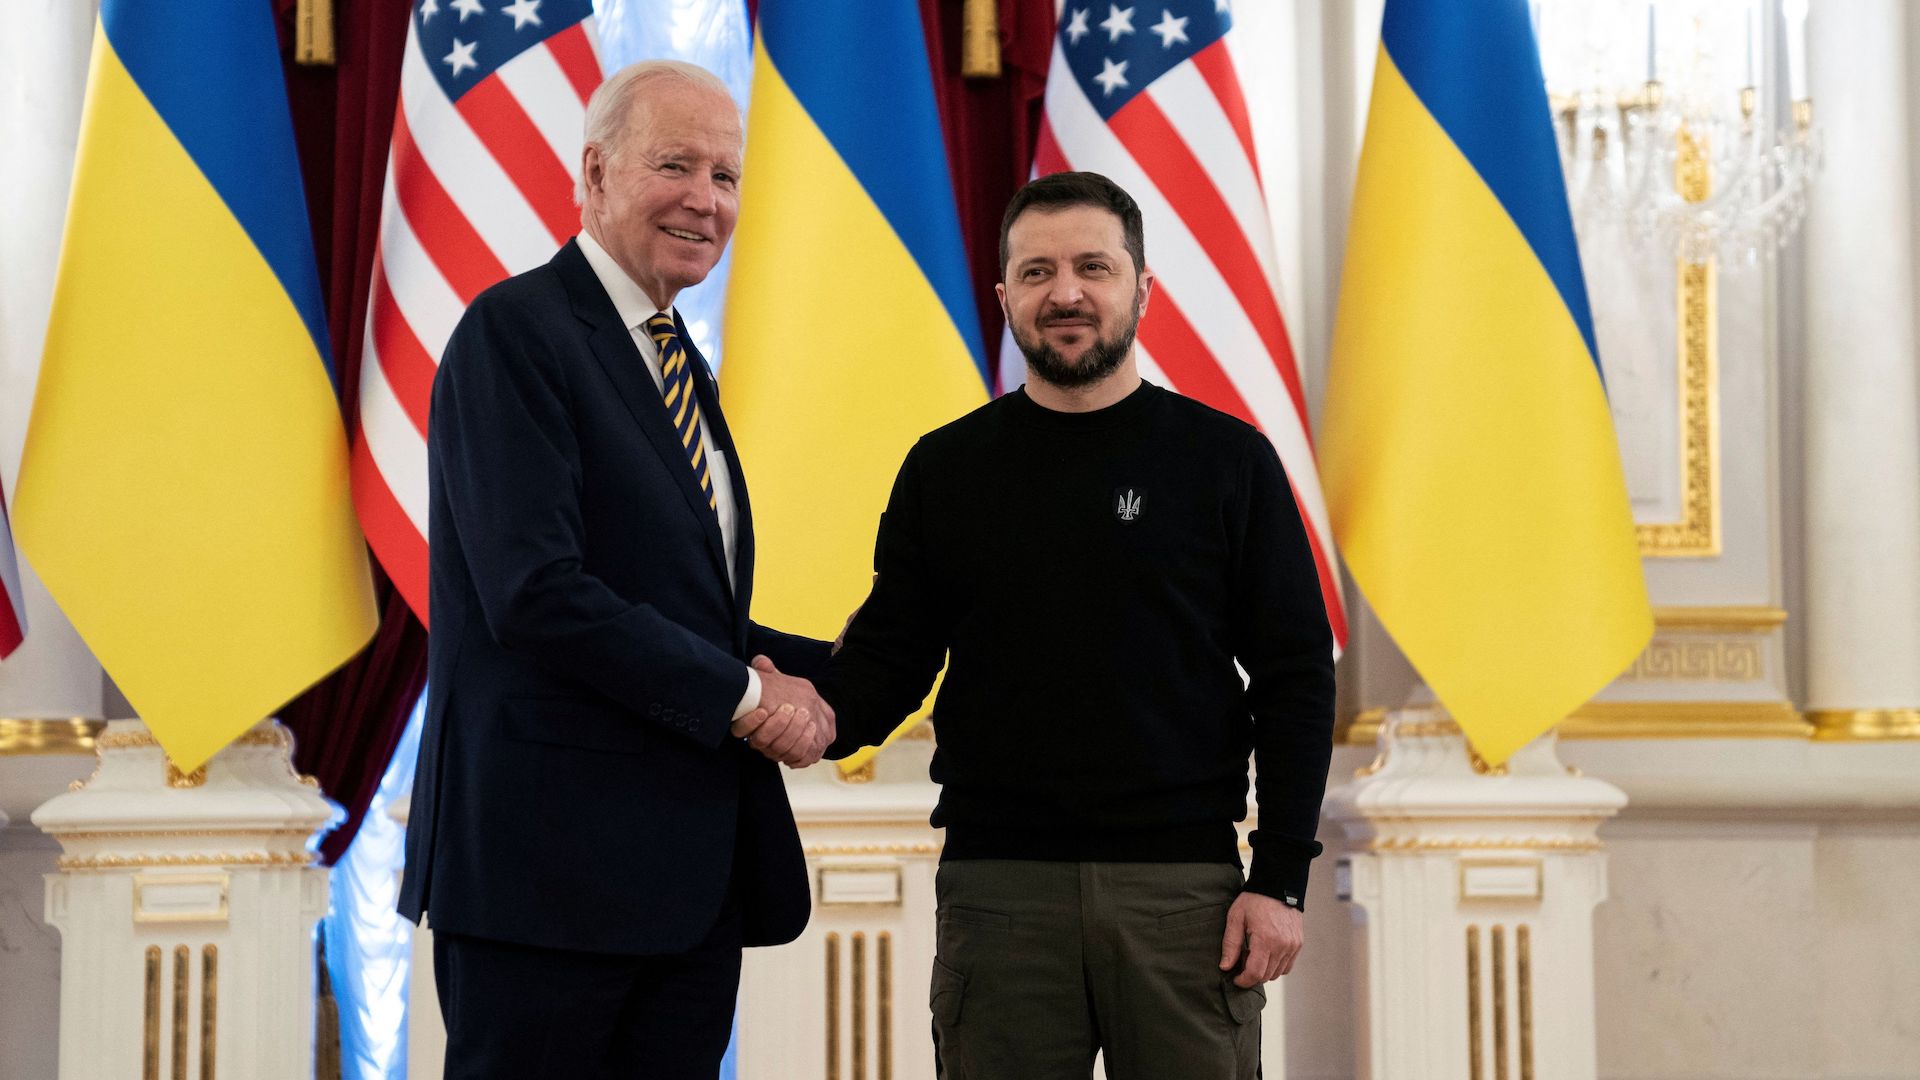 Biden ends day in Warsaw after unannounced trip to Kyiv - The Washington  Post